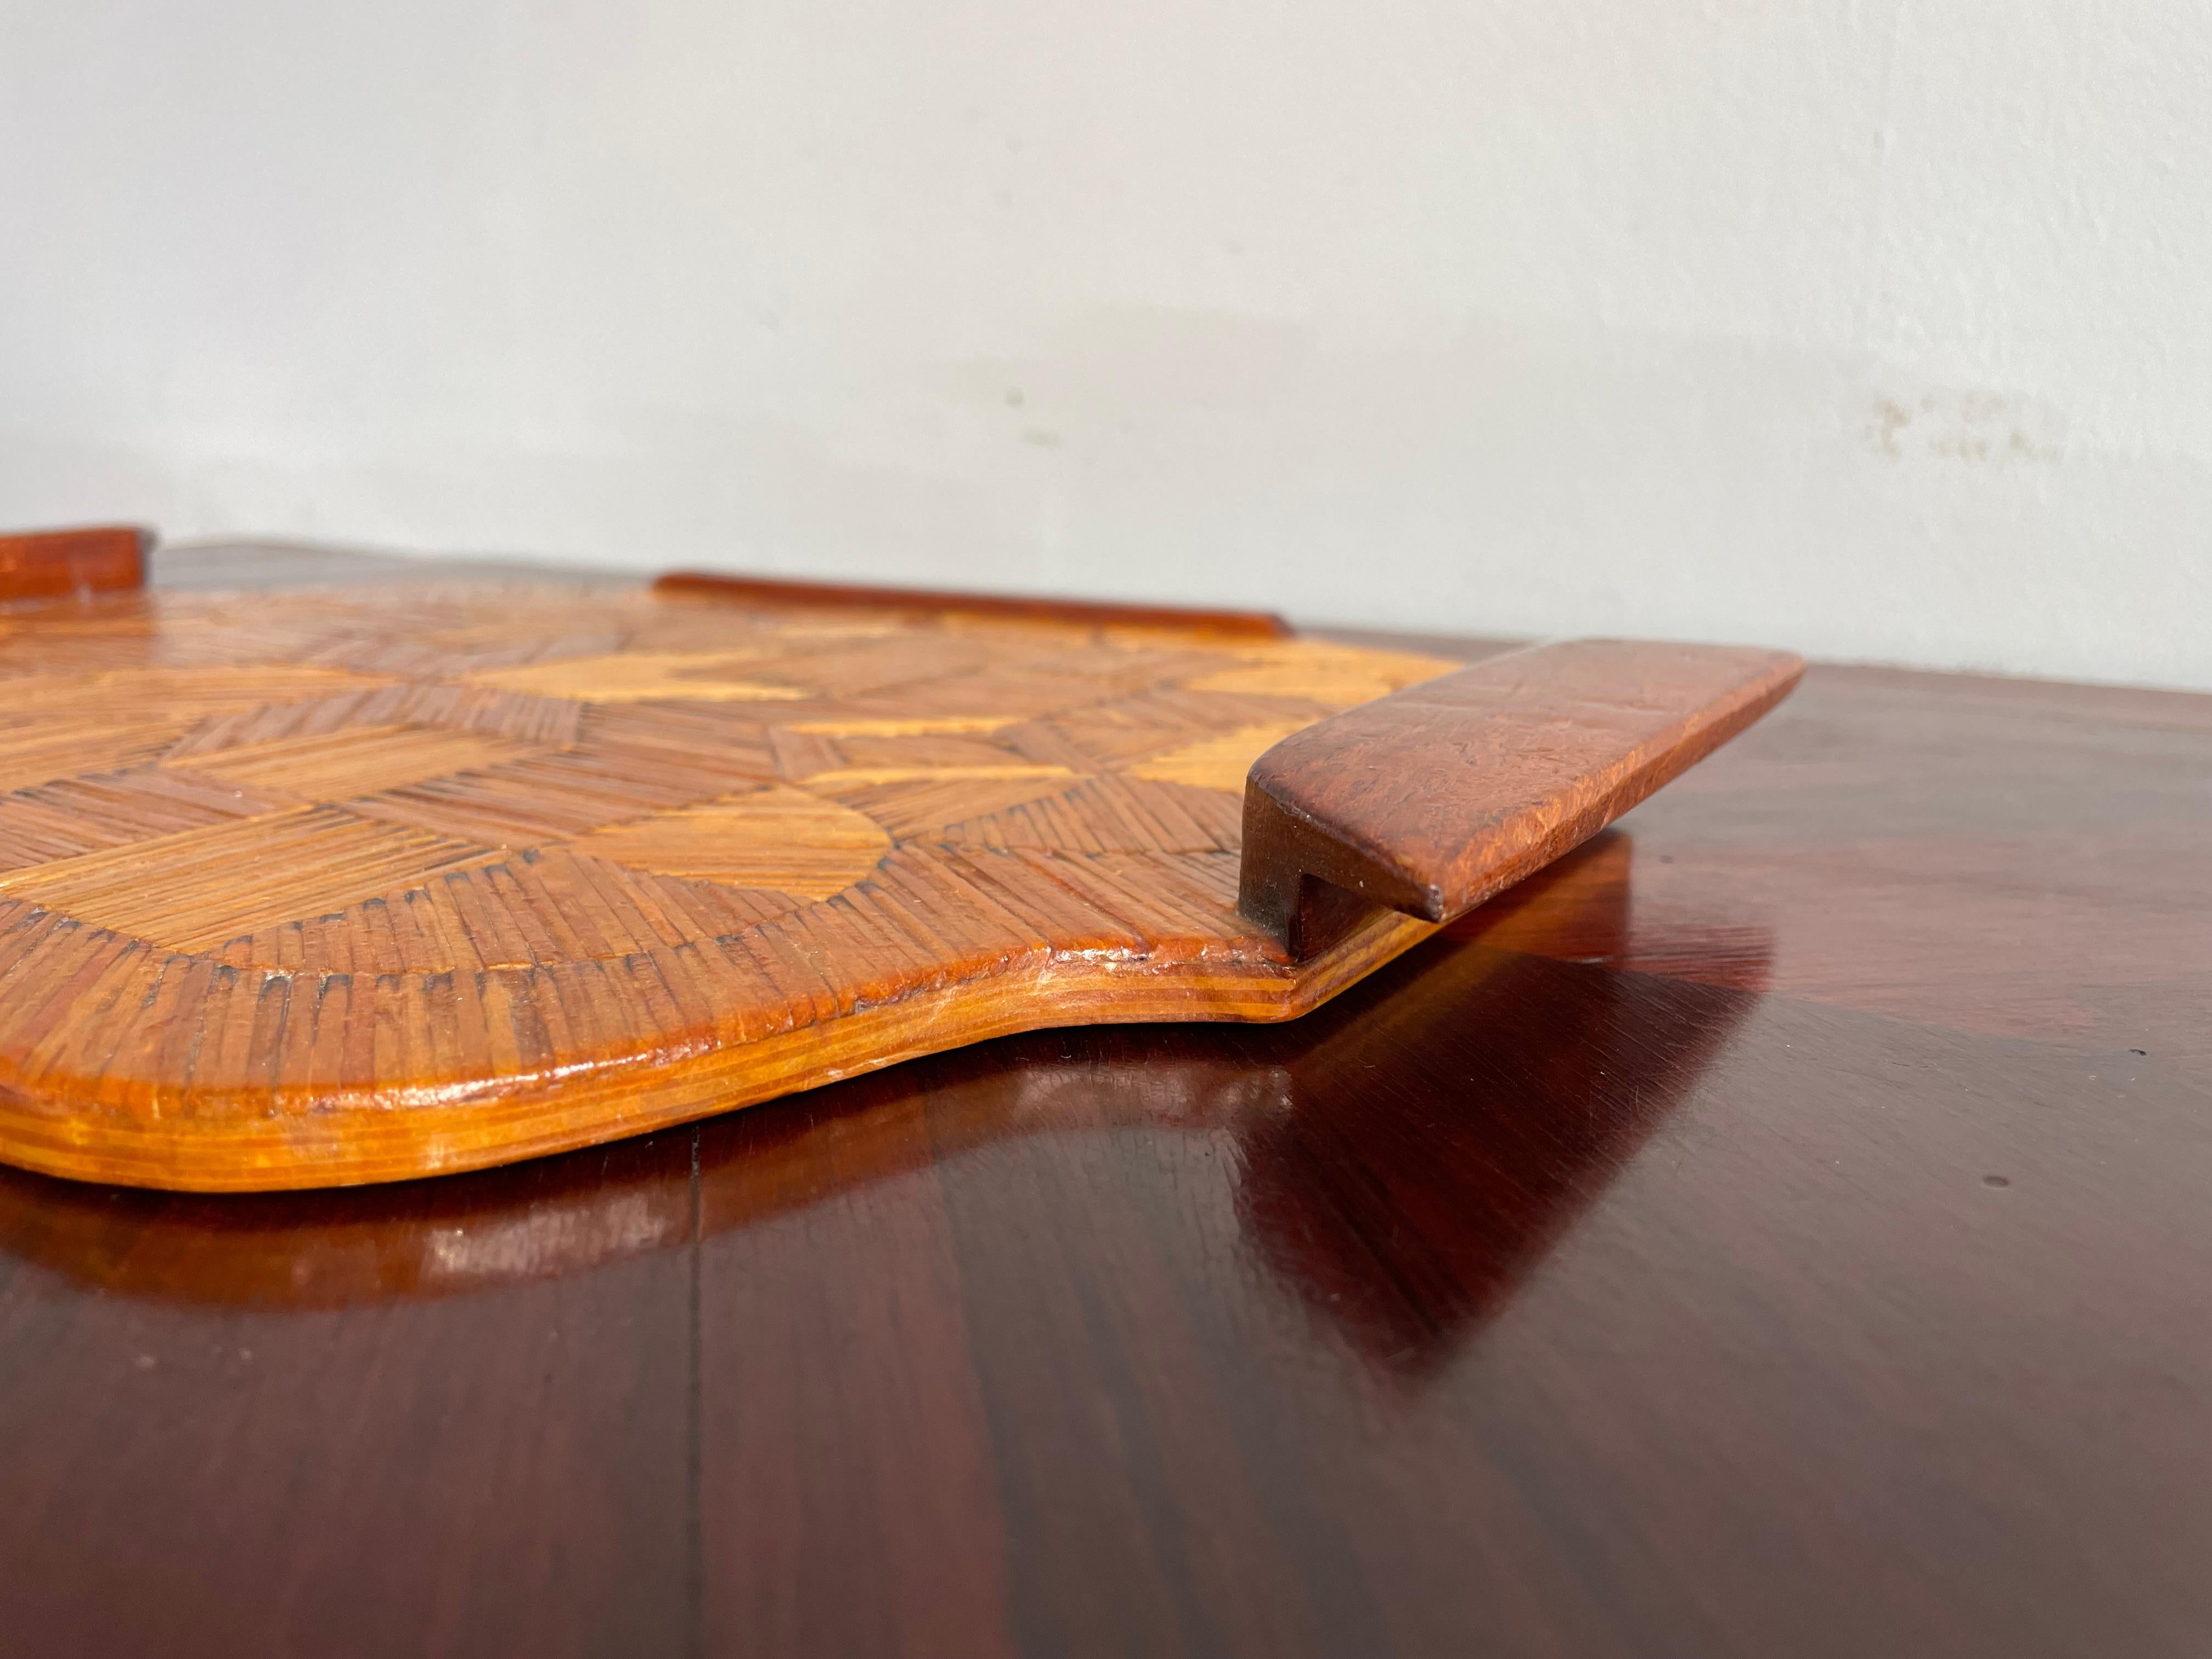 Midcentury Folk Art Serving Tray, Handmade of Burnt Matches in Parquetry Pattern For Sale 4